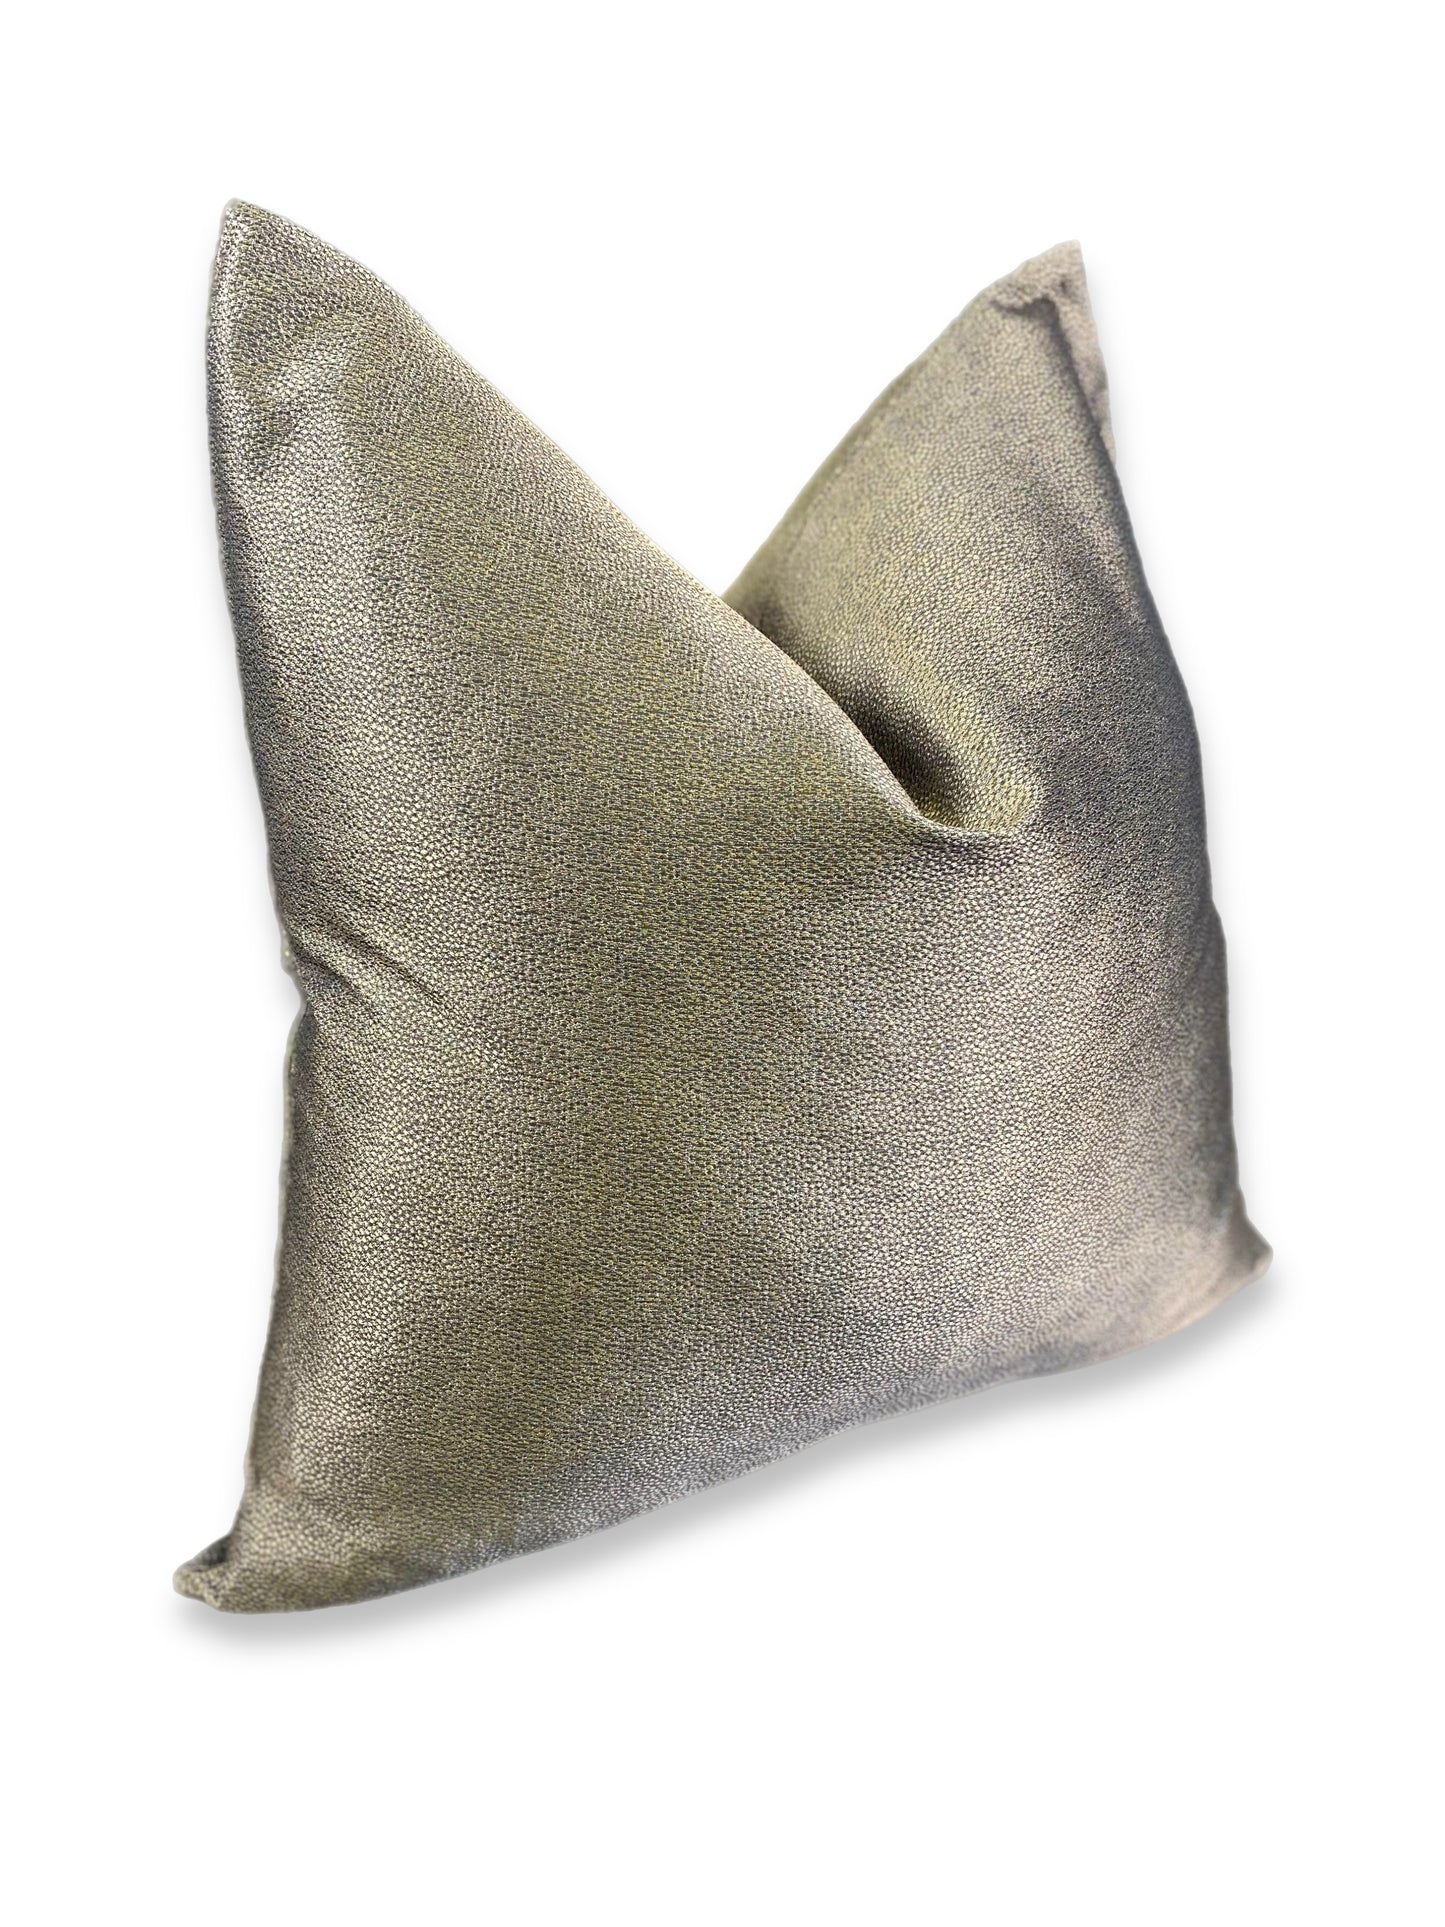 Luxury Pillow - 24" x 24" - Gold Hide; Speckled hide-like fabric that gives a luxurious brushed gold effect